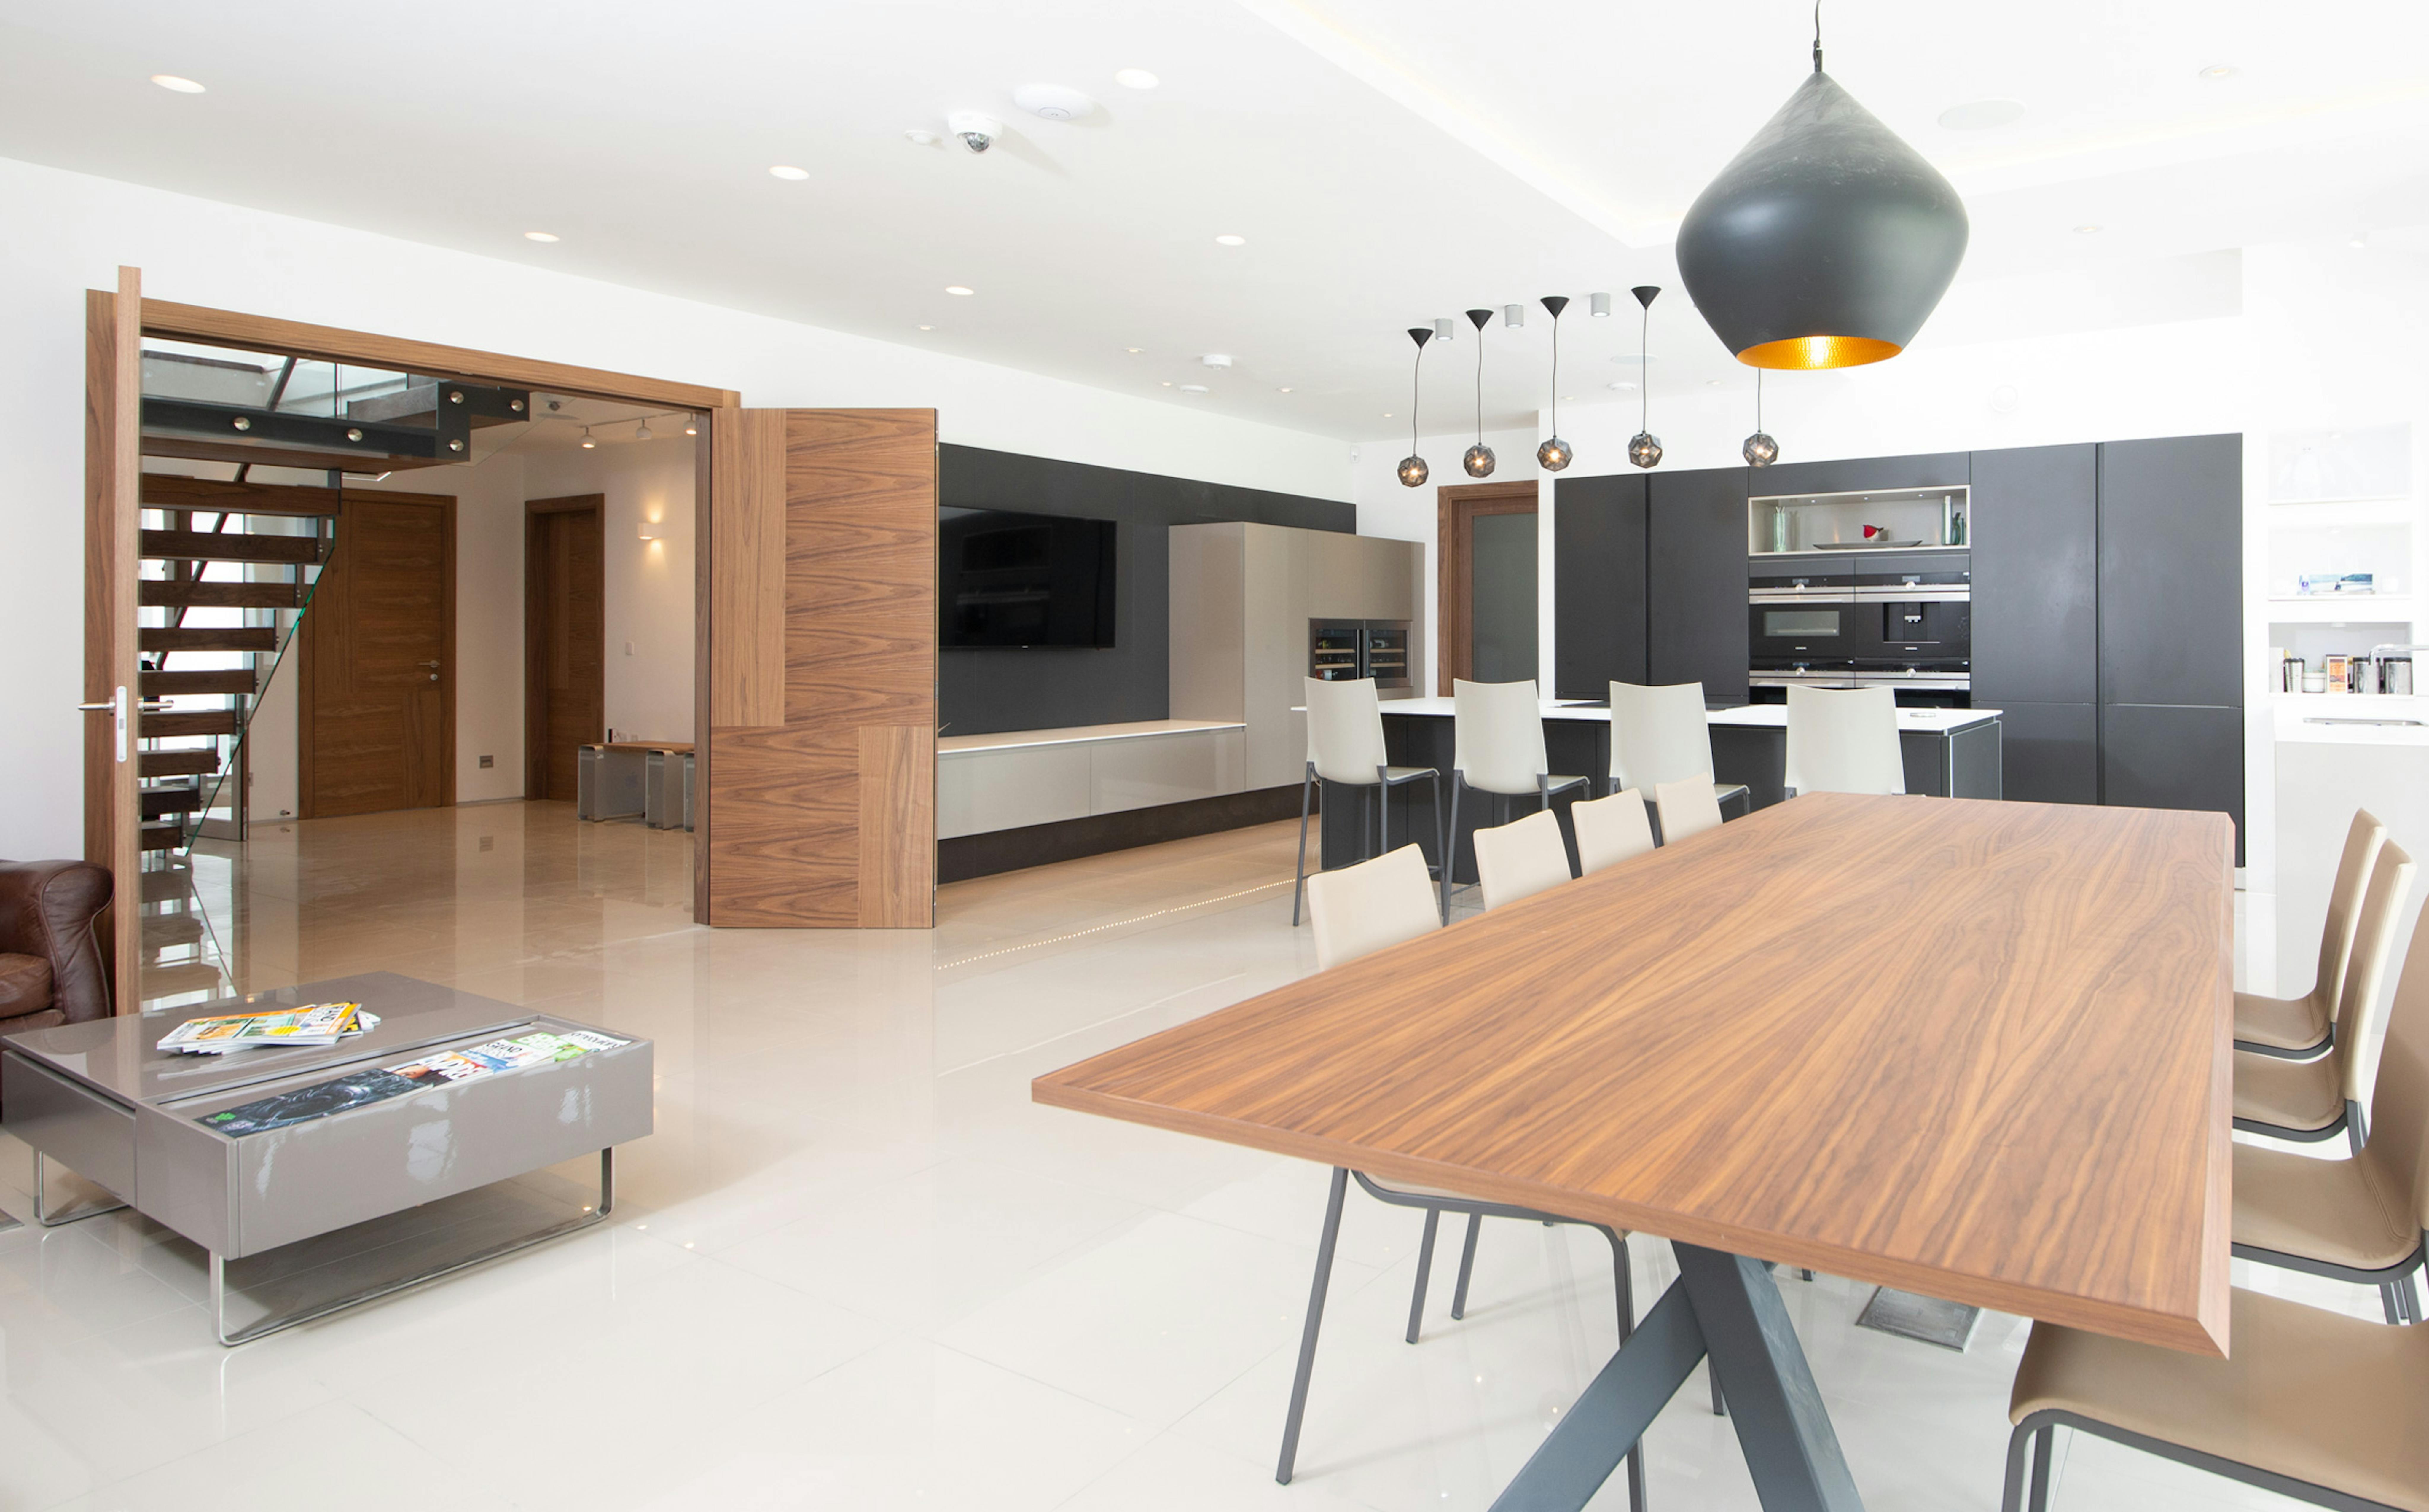 Large and modern open plan kitchen, dining and living area  featuring a Deuren double leaf door set - Vario 4 style, in a walnut veneer finish.